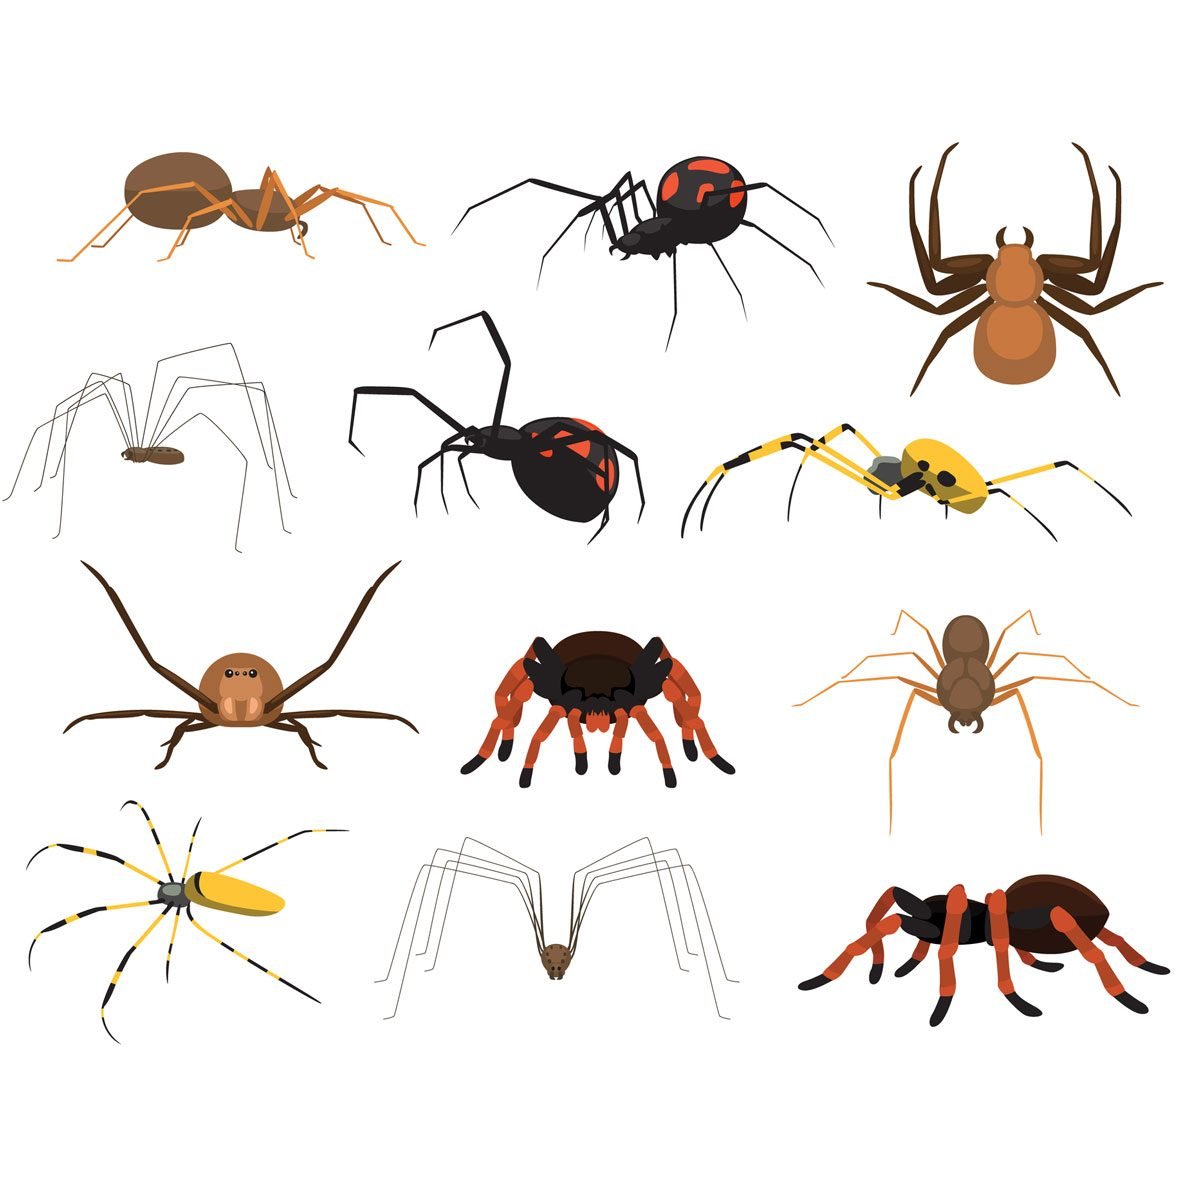 Are Spiders Dangerous to People, Pets and Property?